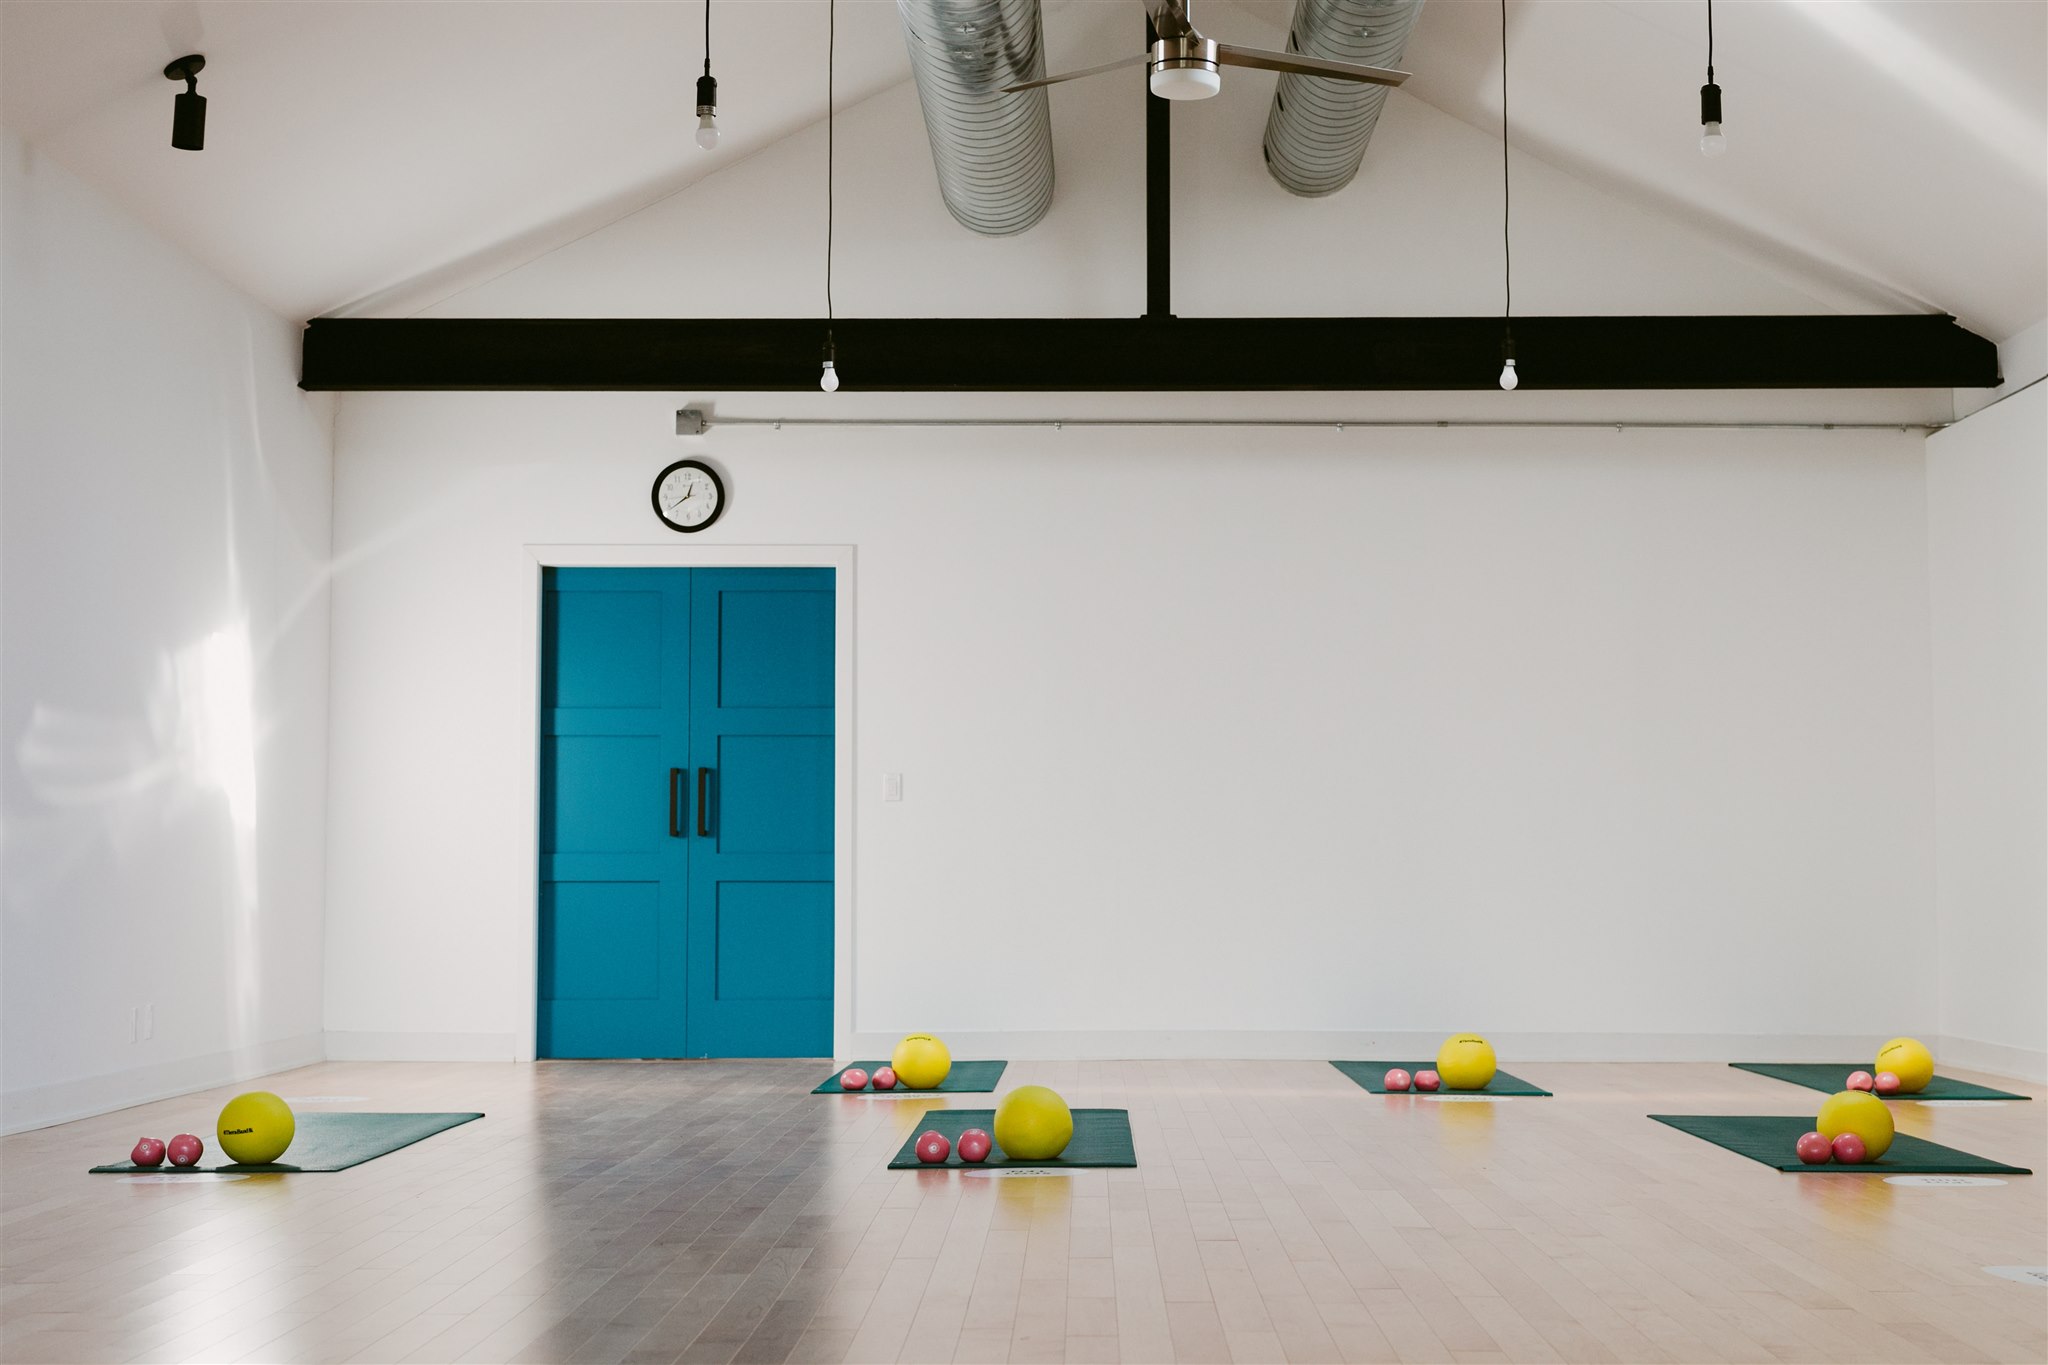 Class Schedule - Downward Dog Yoga Centre